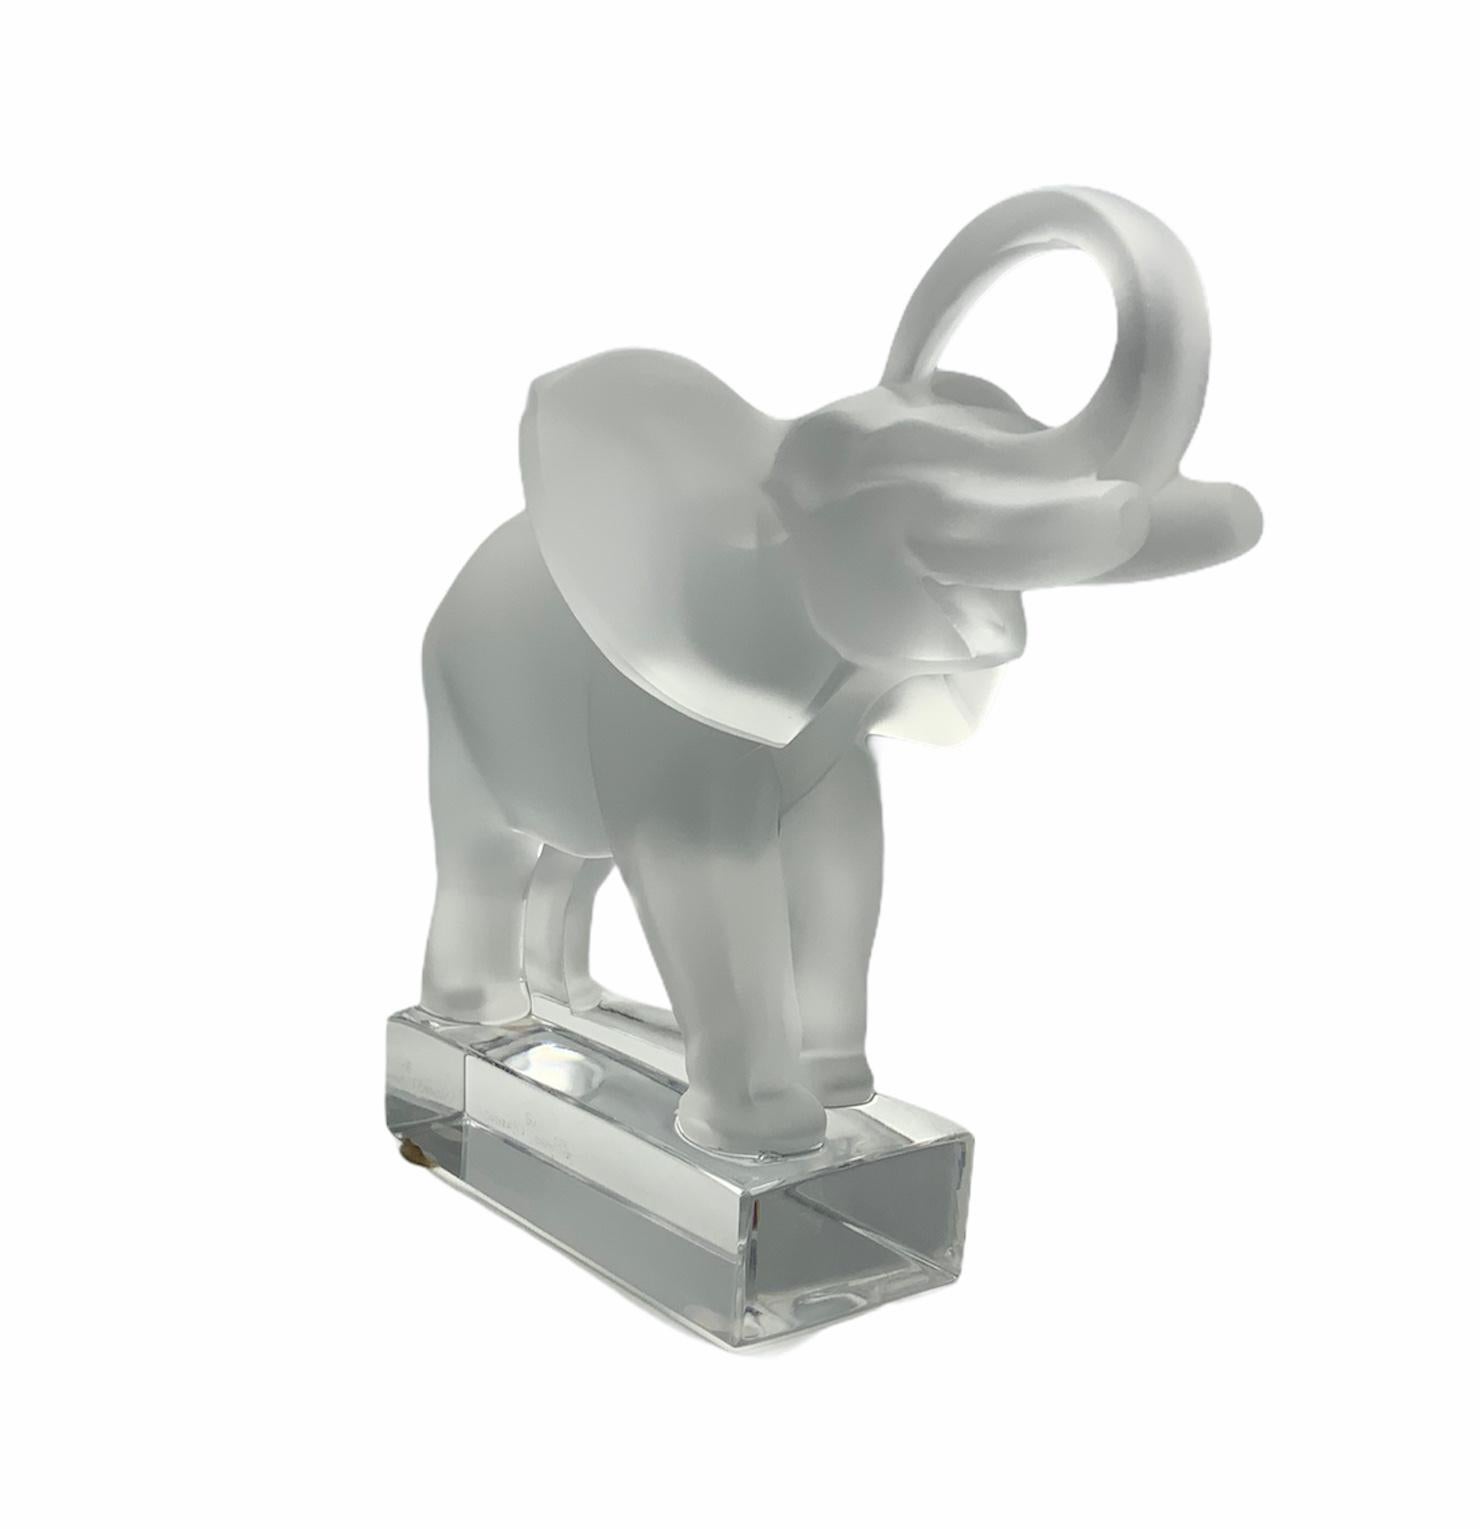 This is a Lalique frosted crystal sculpture of a happy elephant with a large trunk up. He is supported by a clear crystal rectangular base. In one of the border of the base is signed Lalique R France. Elephants are symbol of good luck, wisdom and